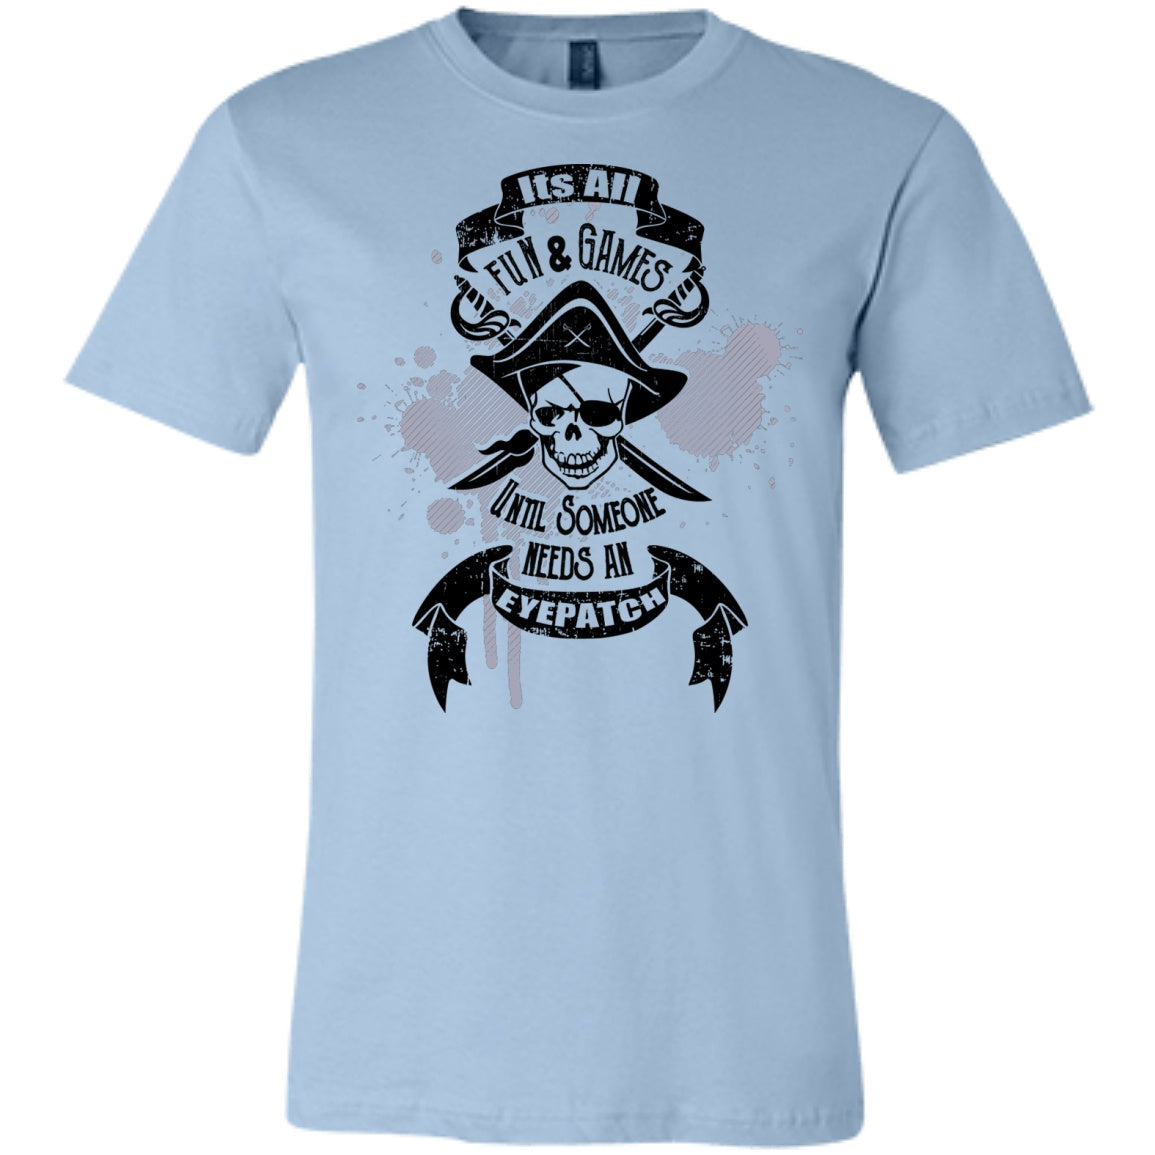 It's All Fun And Games Until Someone Needs An Eyepatch - Unisex and Women's Shirts - GoneBold.gift